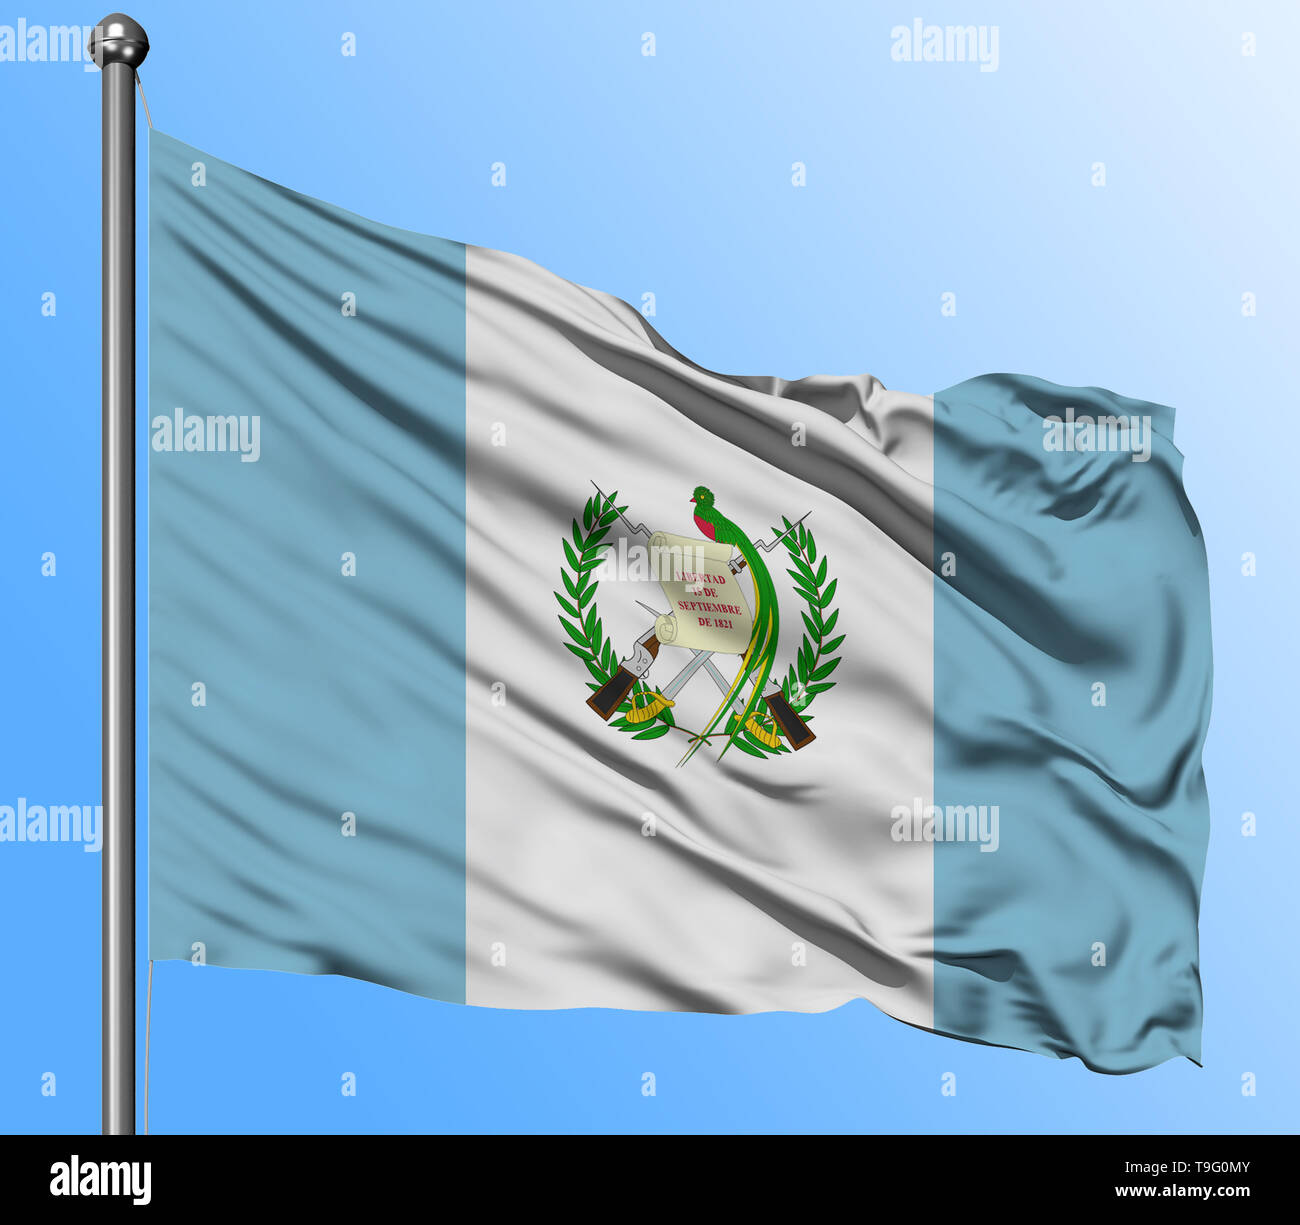 Guatemala flag waving in the deep blue sky background. Isolated